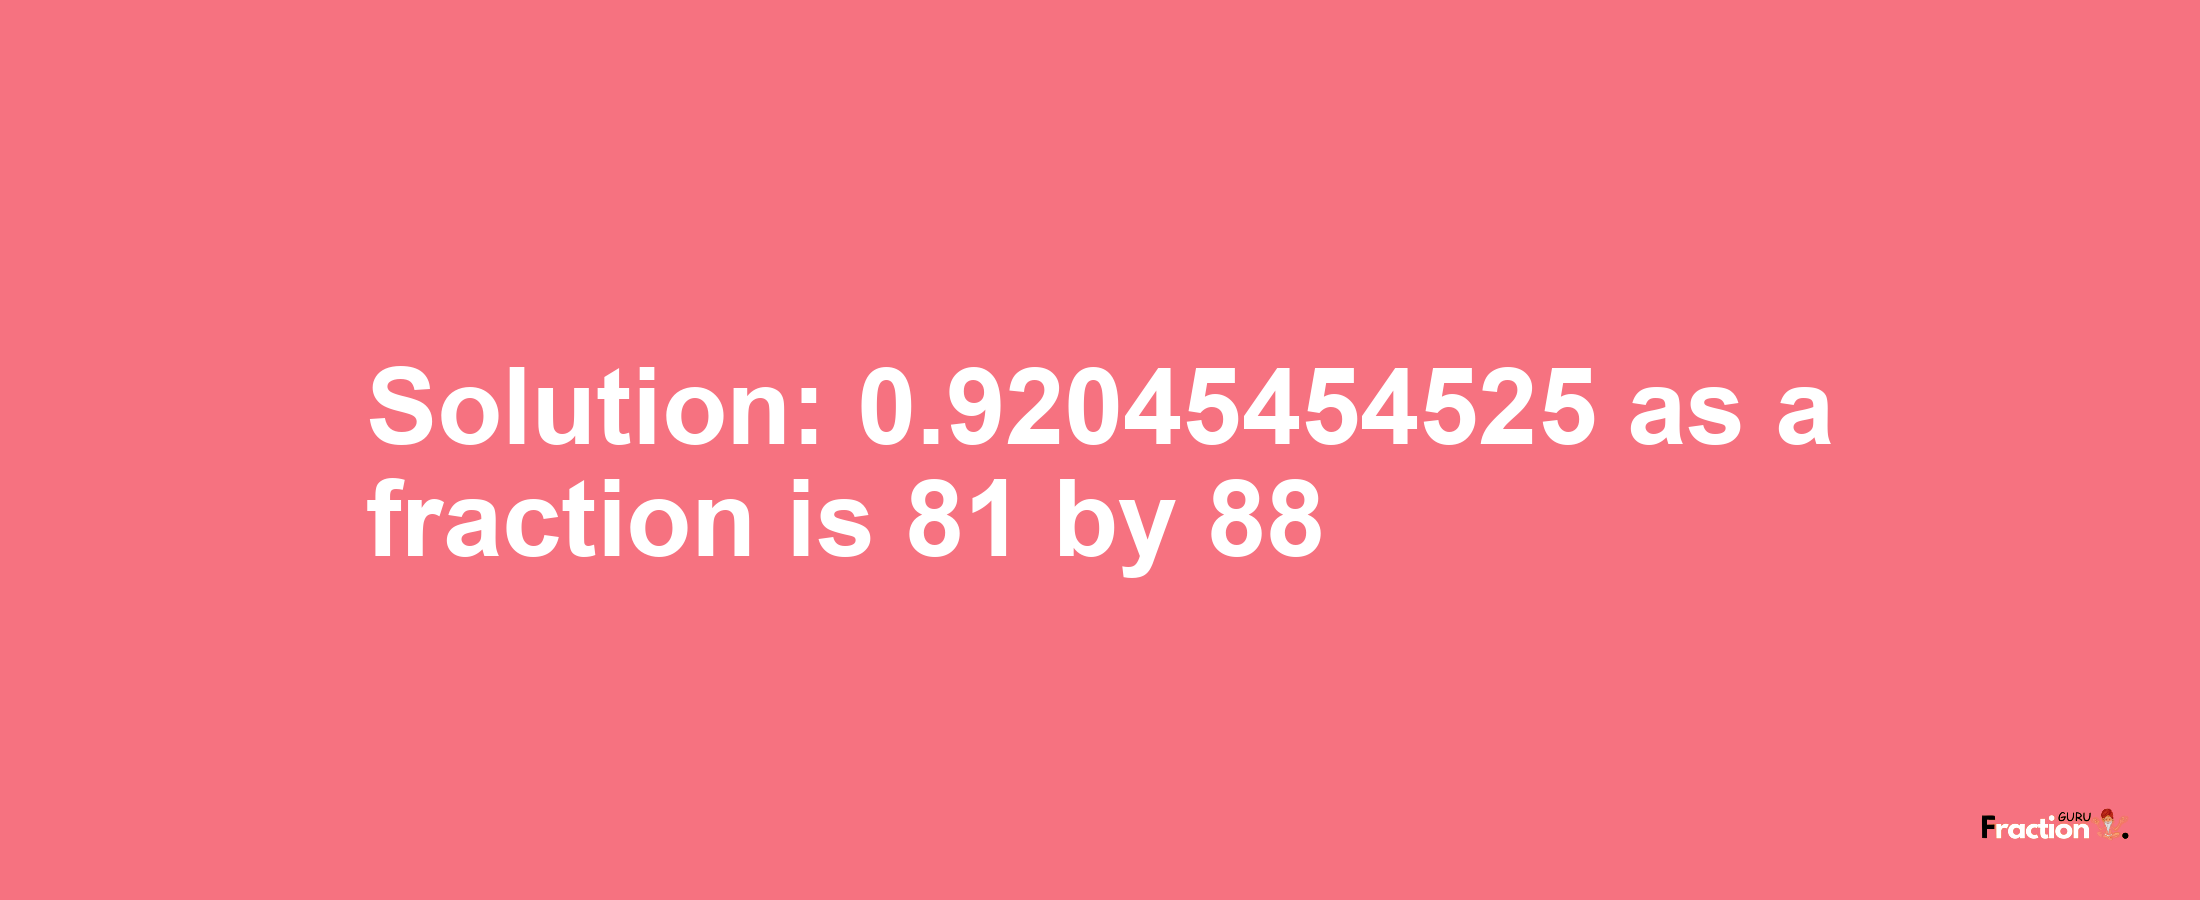 Solution:0.92045454525 as a fraction is 81/88